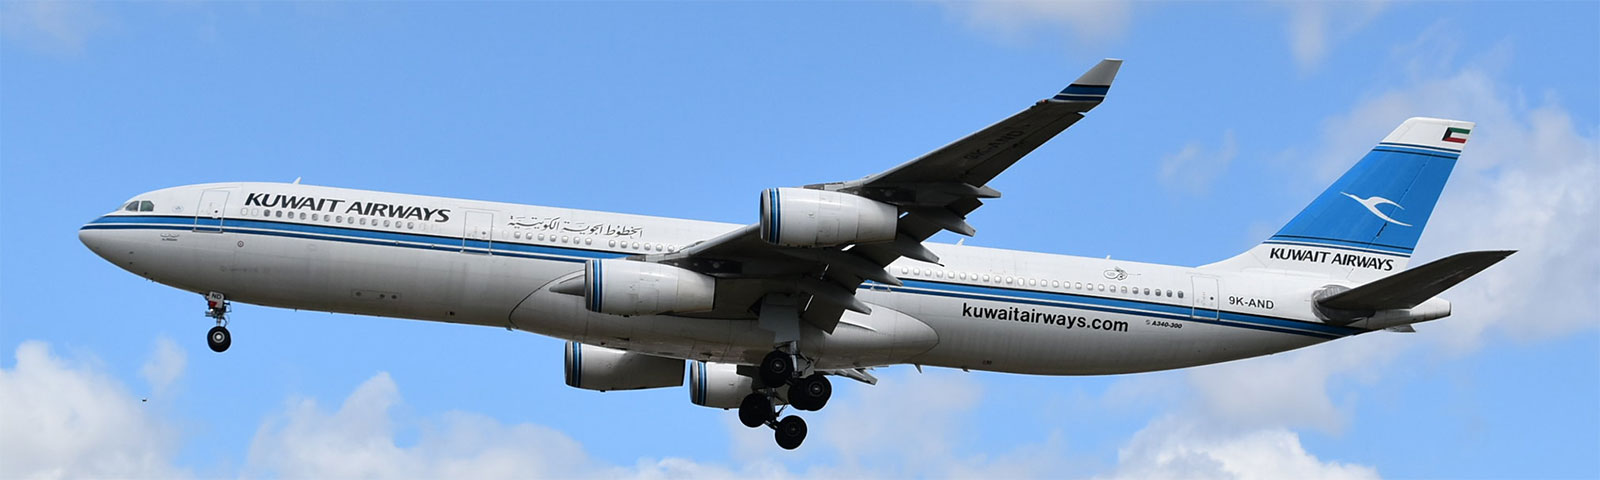 aereoplano kuwait airlines in decollo